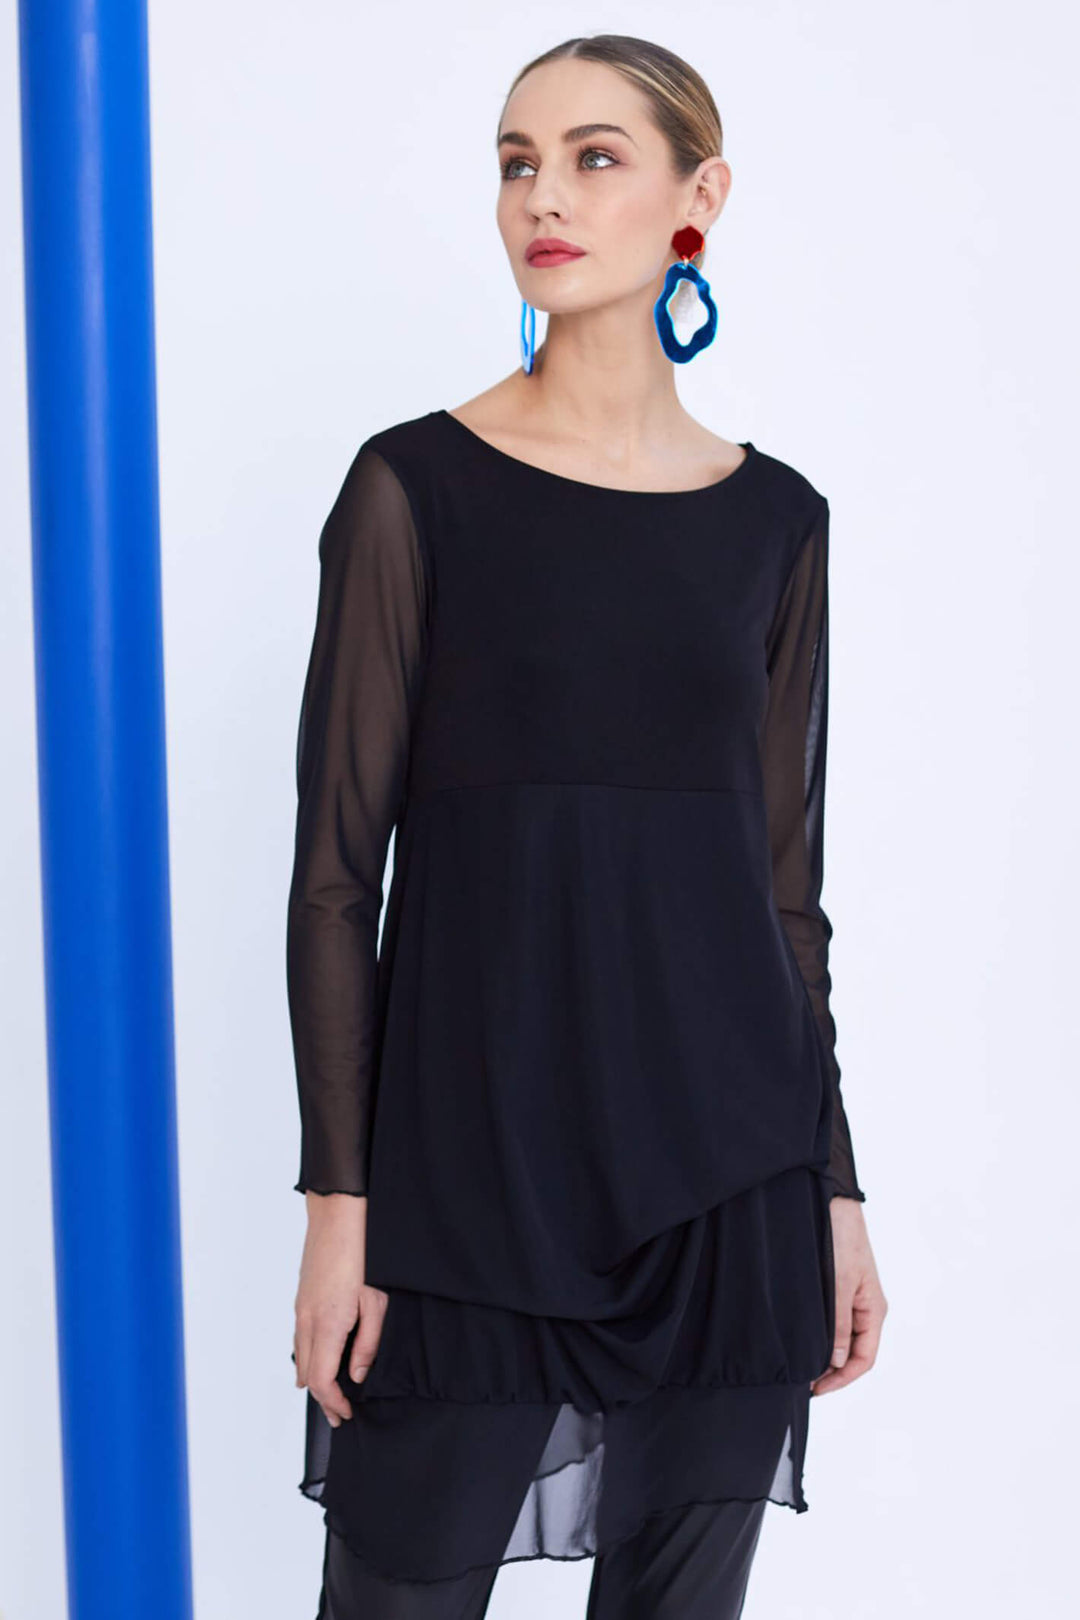 Naya NAW23 149 Black Jersey Ruffle Tunic With Sleeves - Experience Boutique